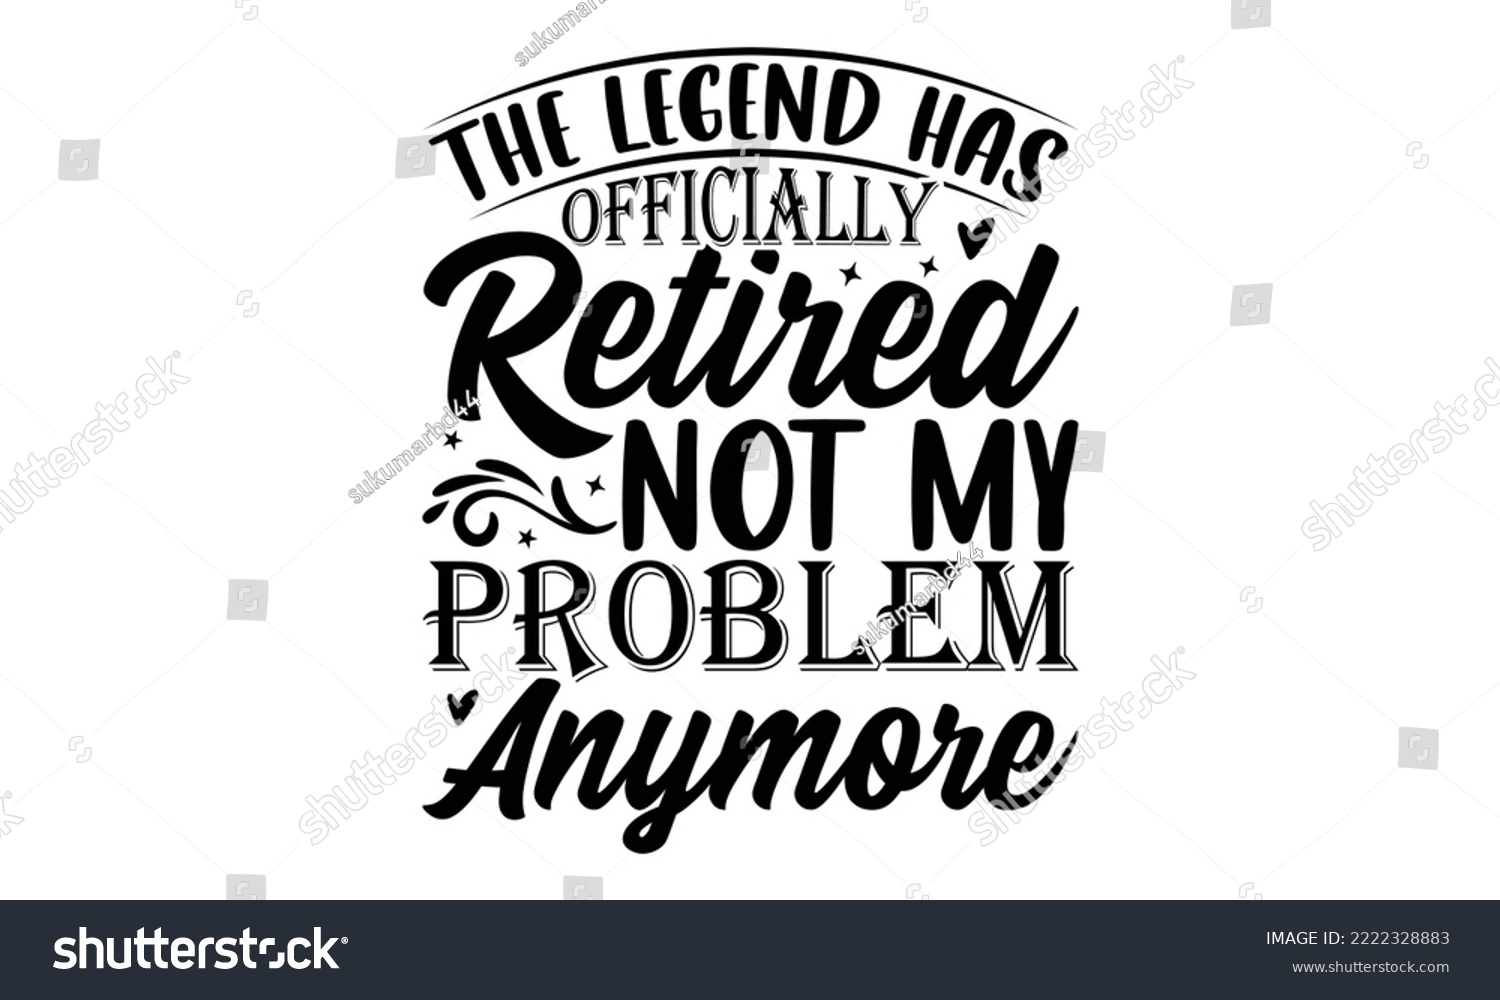 SVG of The Legend Has Officially Retired Not My Problem Anymore - Retirement SVG Design, Hand drawn lettering phrase isolated on white background, typography t shirt design, eps, Files for Cutting svg